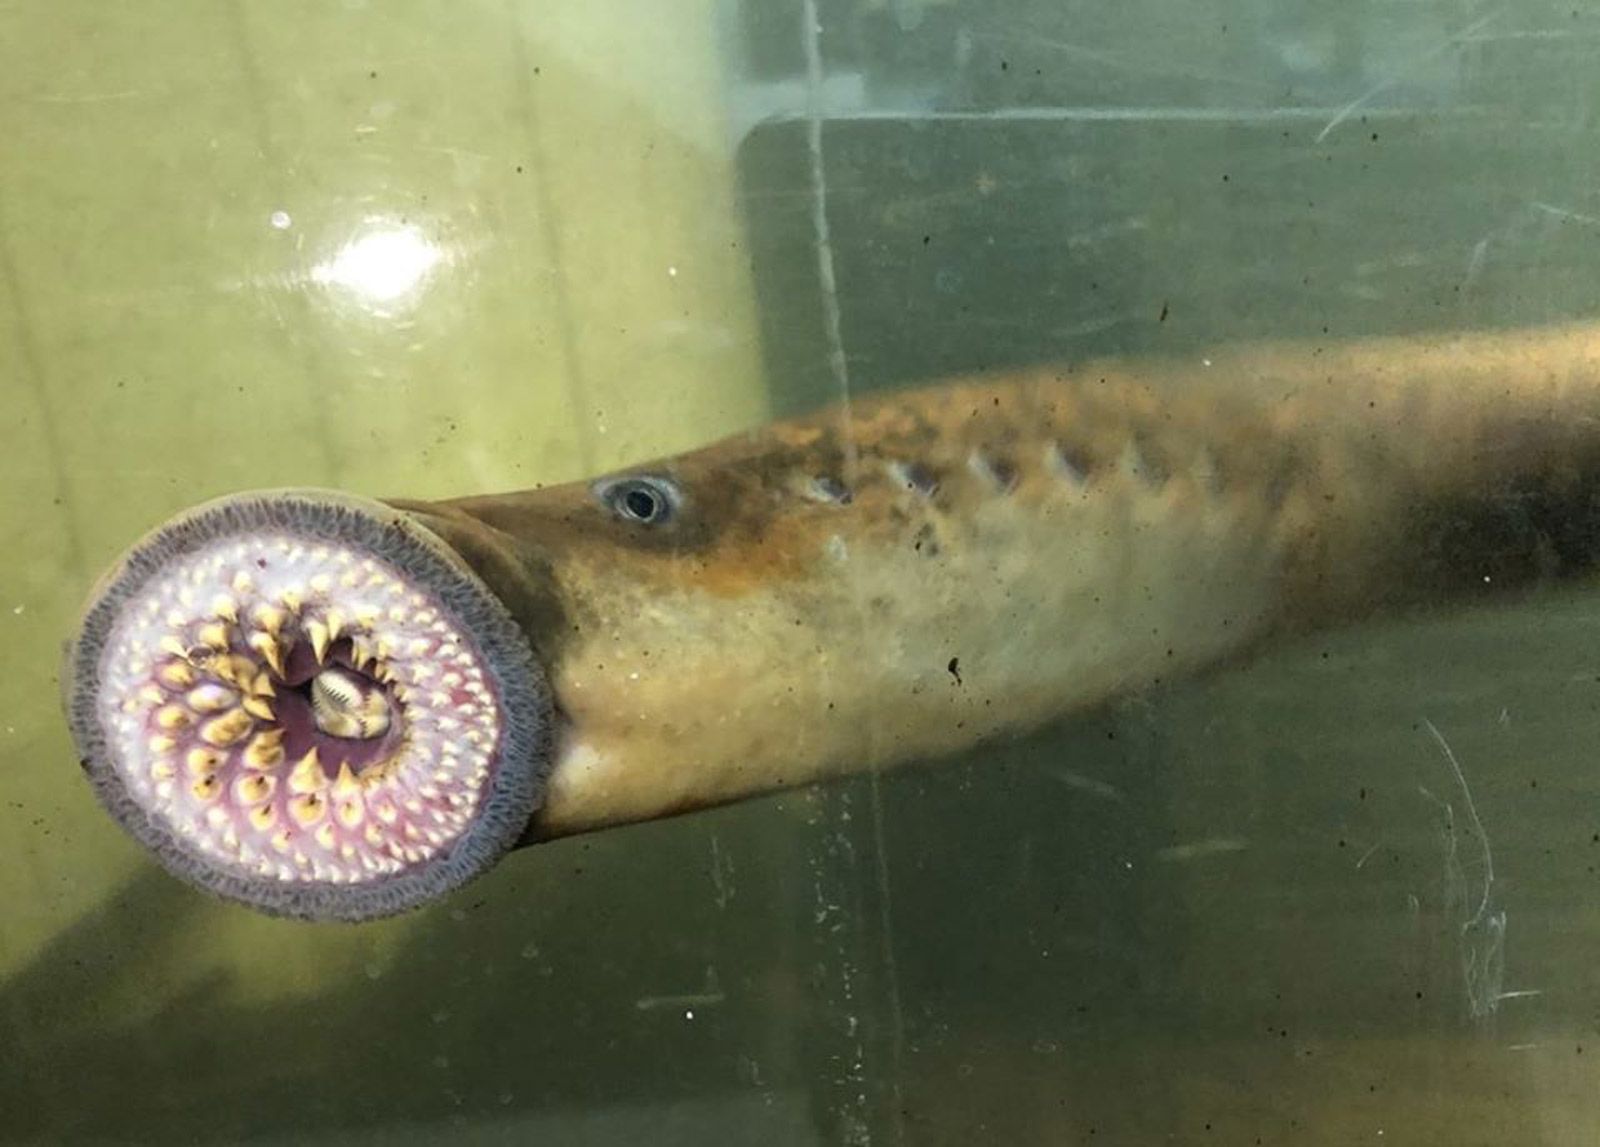 A 'vampire fish' is spawning in Vermont's waters. Experts say most